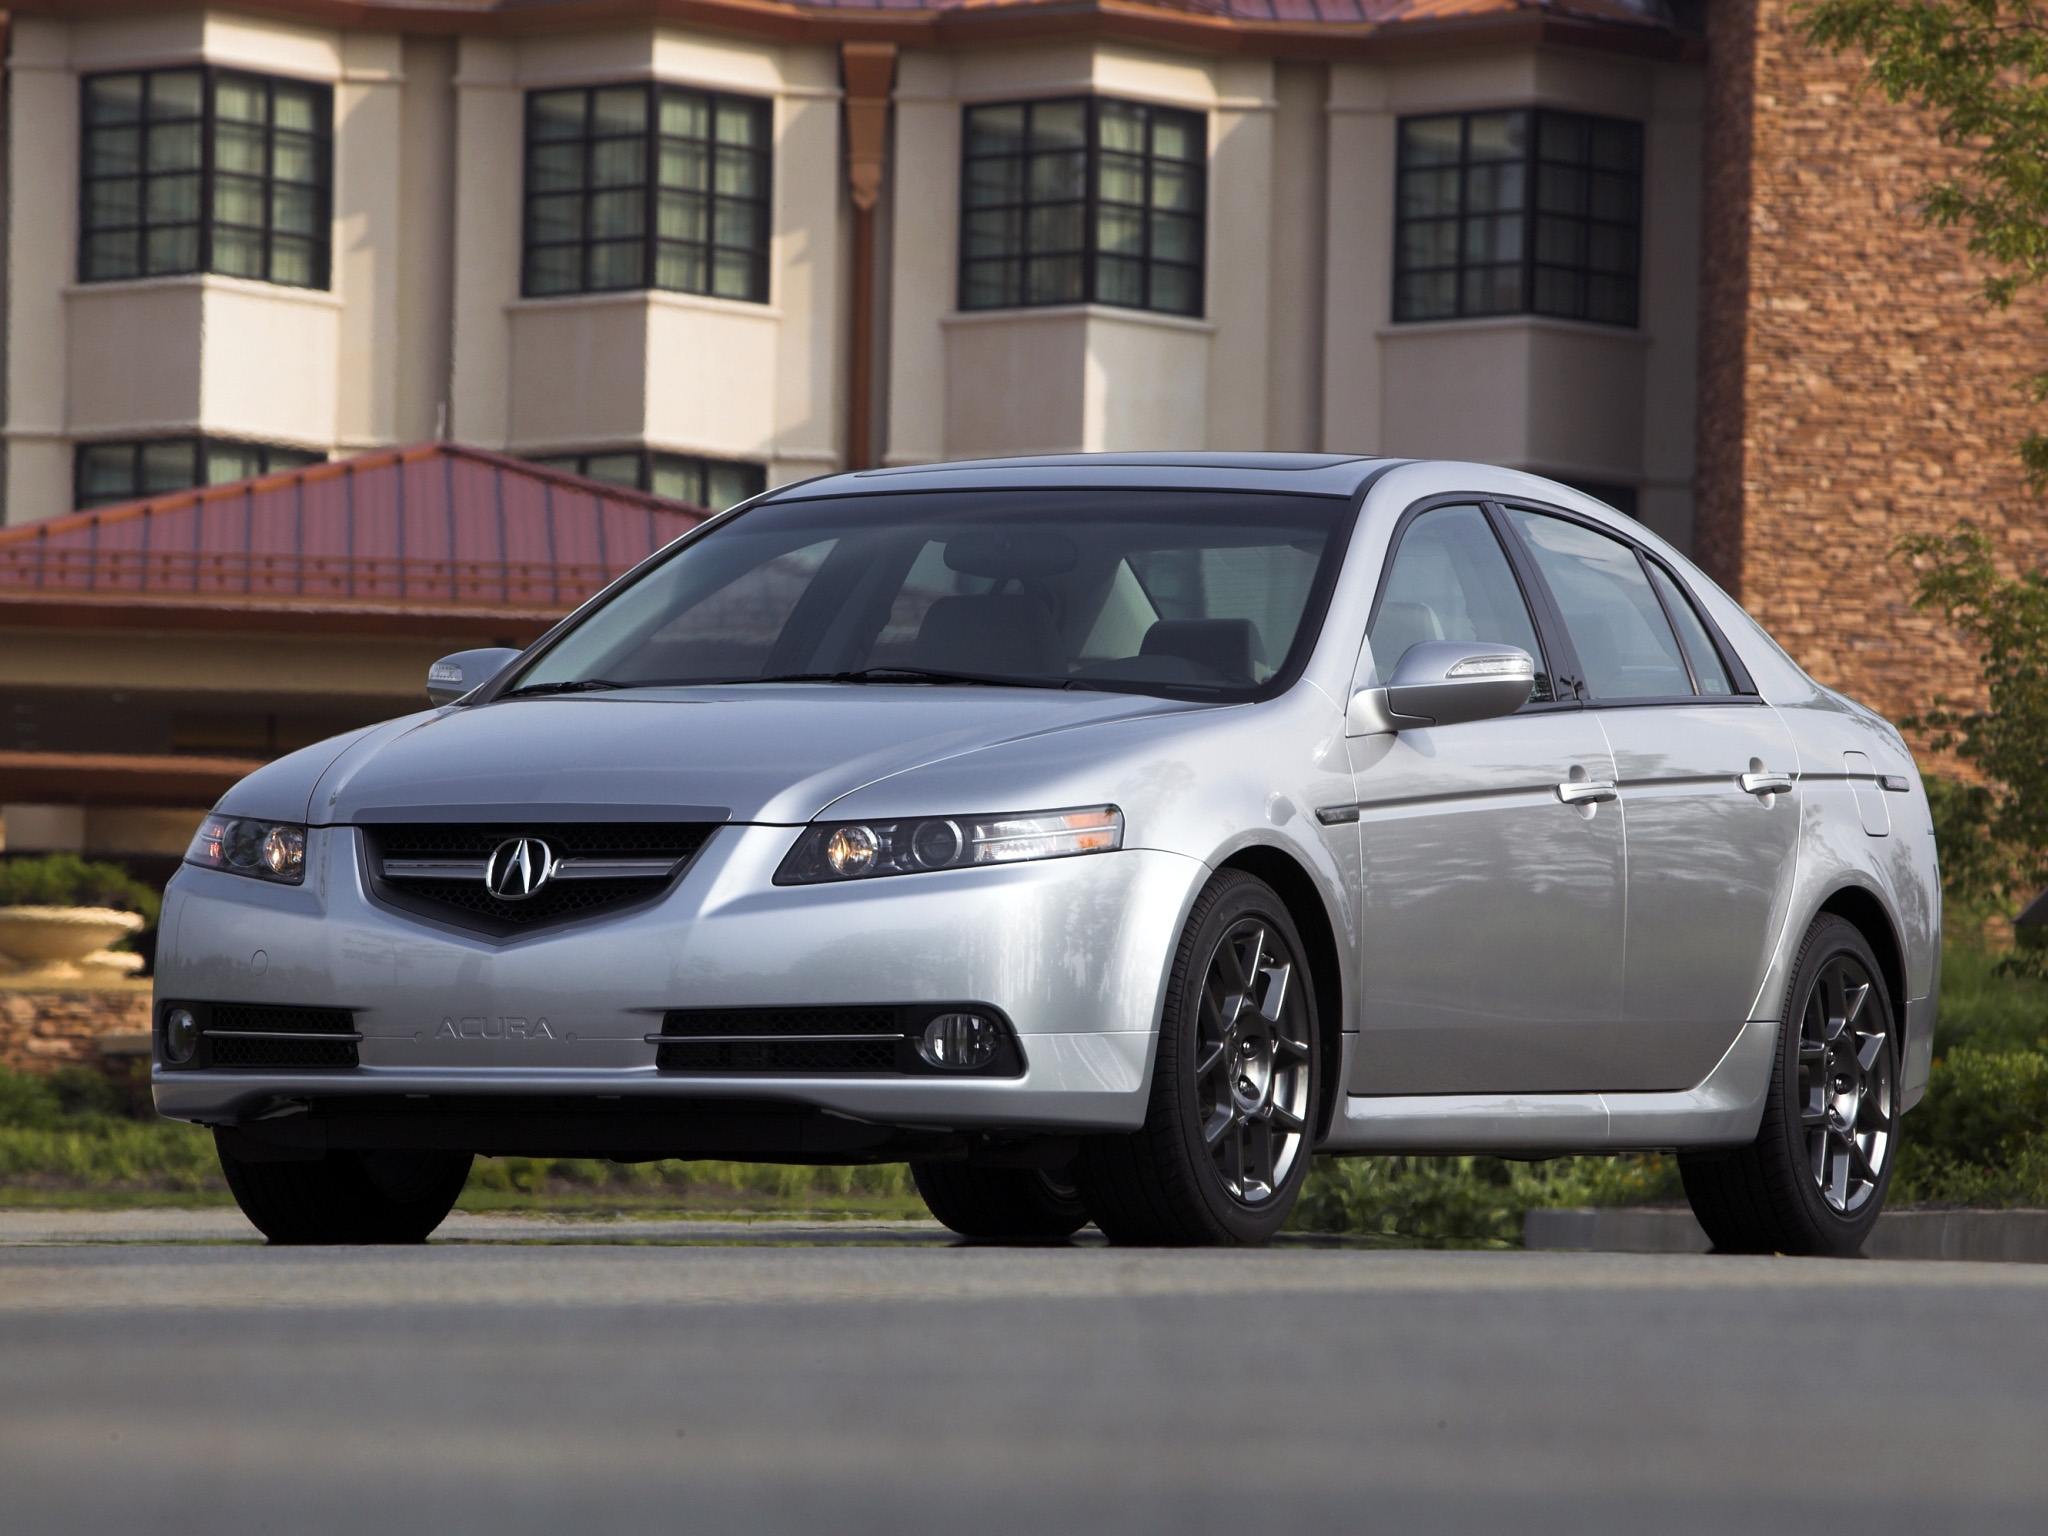 front view, auto, grass, acura, cars, building, style, tl, 2007, silver metallic 8K